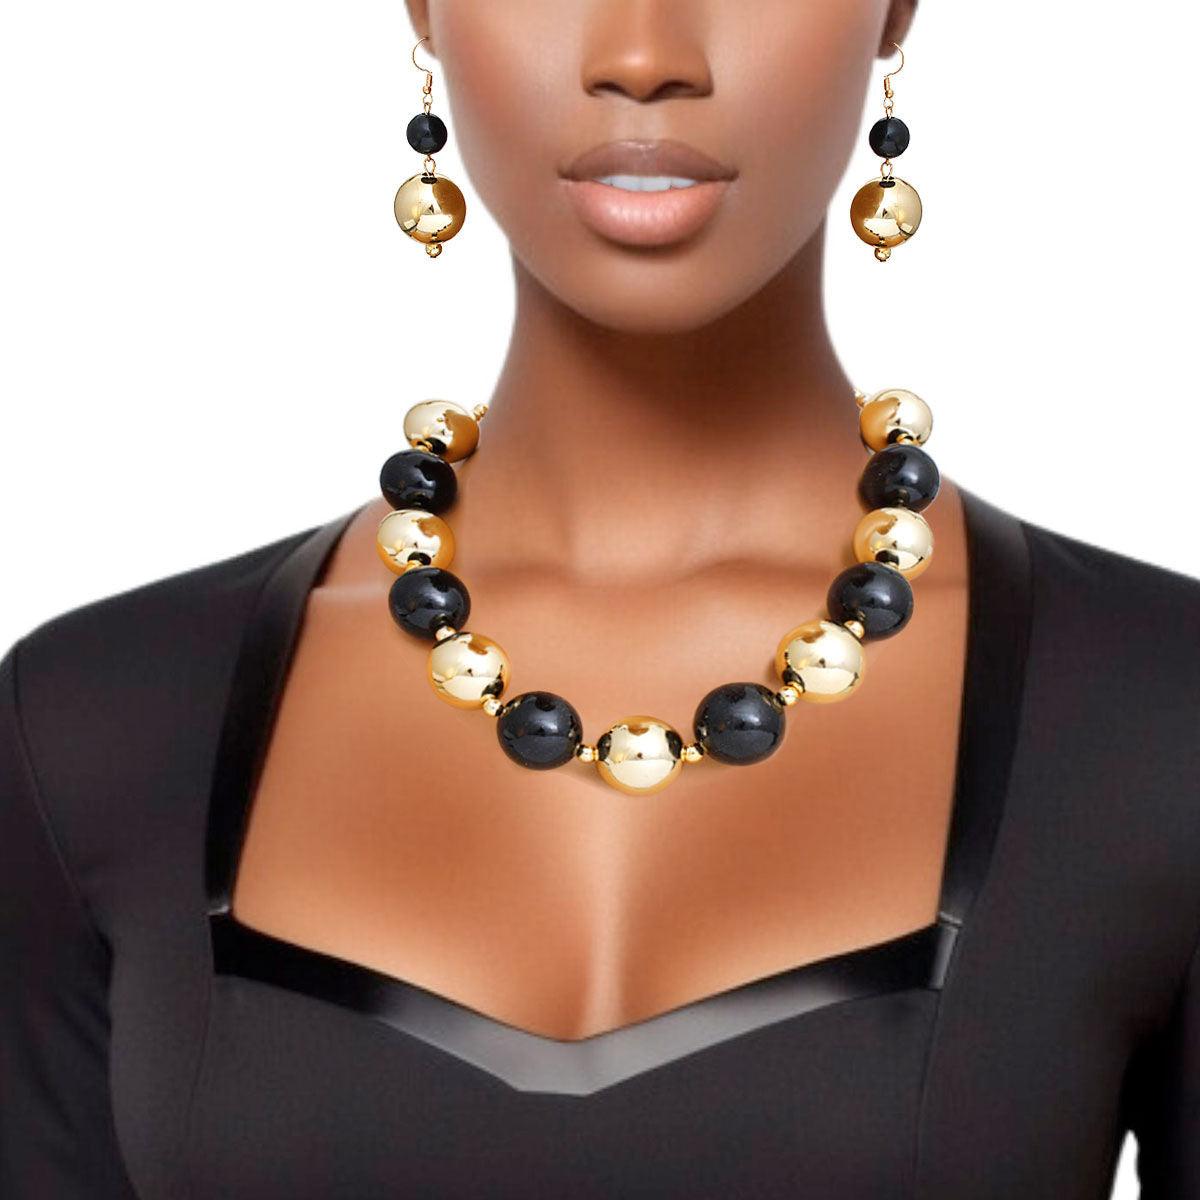 Bauble Pearl Black Gold Necklace Earrings Set - Level Up Your Fashion Jewelry Collection